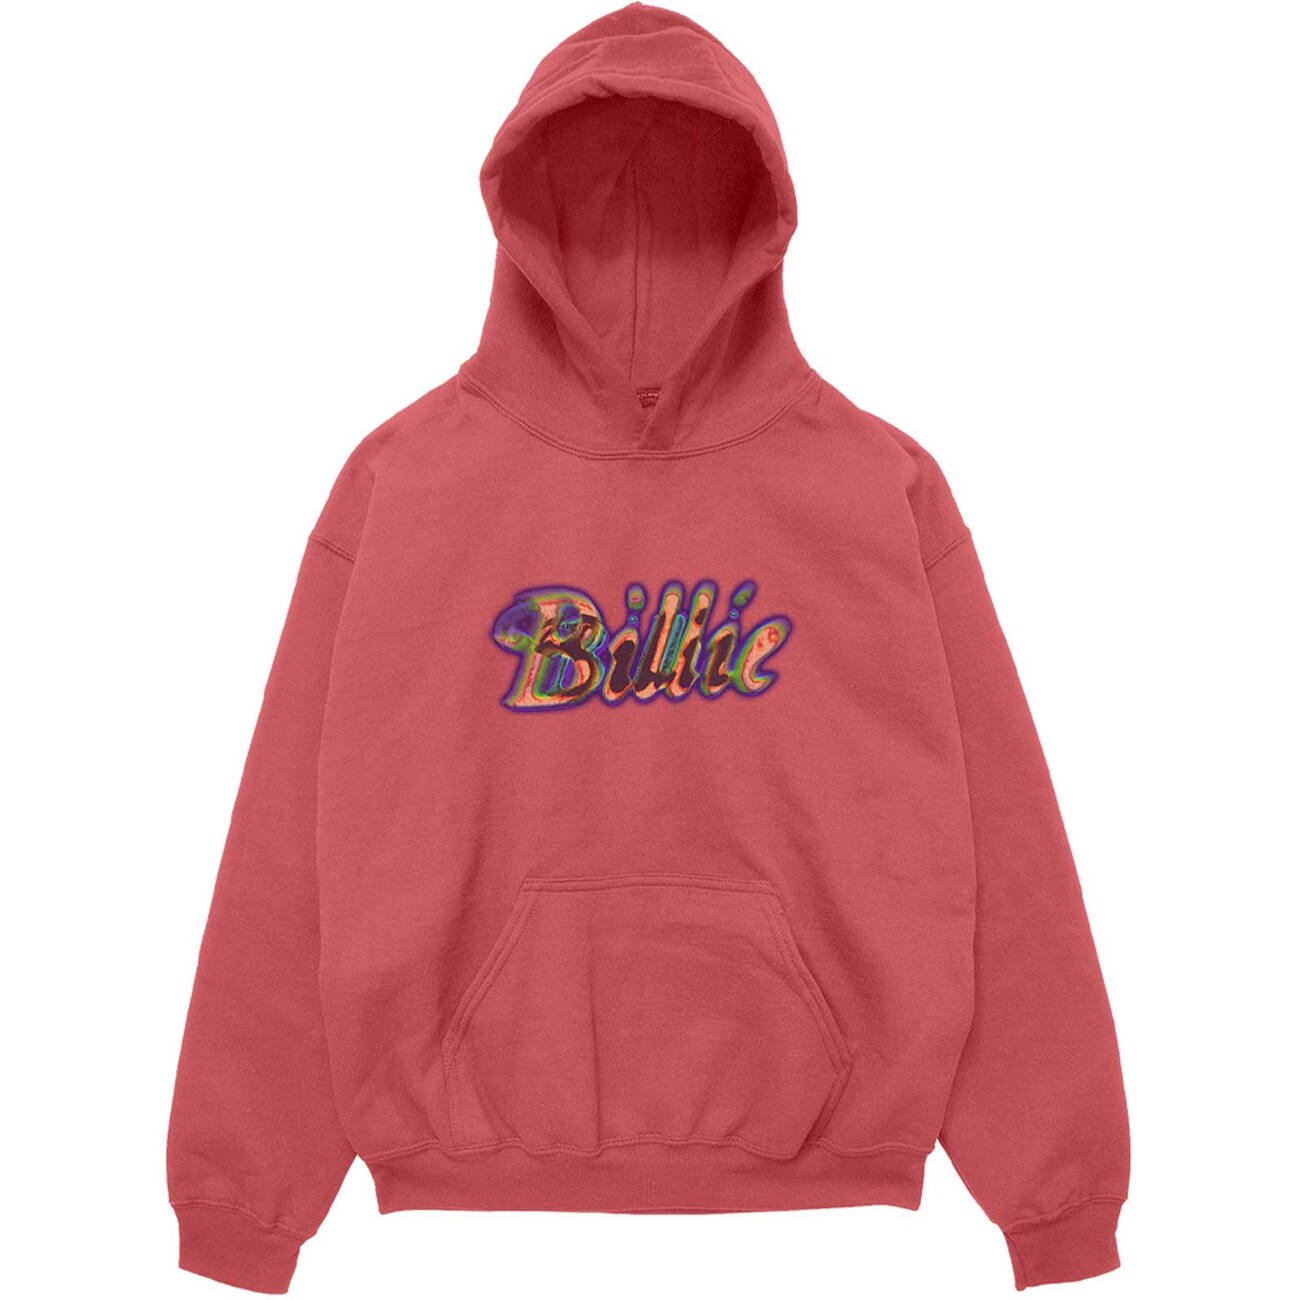 Billie Eilish - Silhouettes | Clothes and accessories for merchandise fans